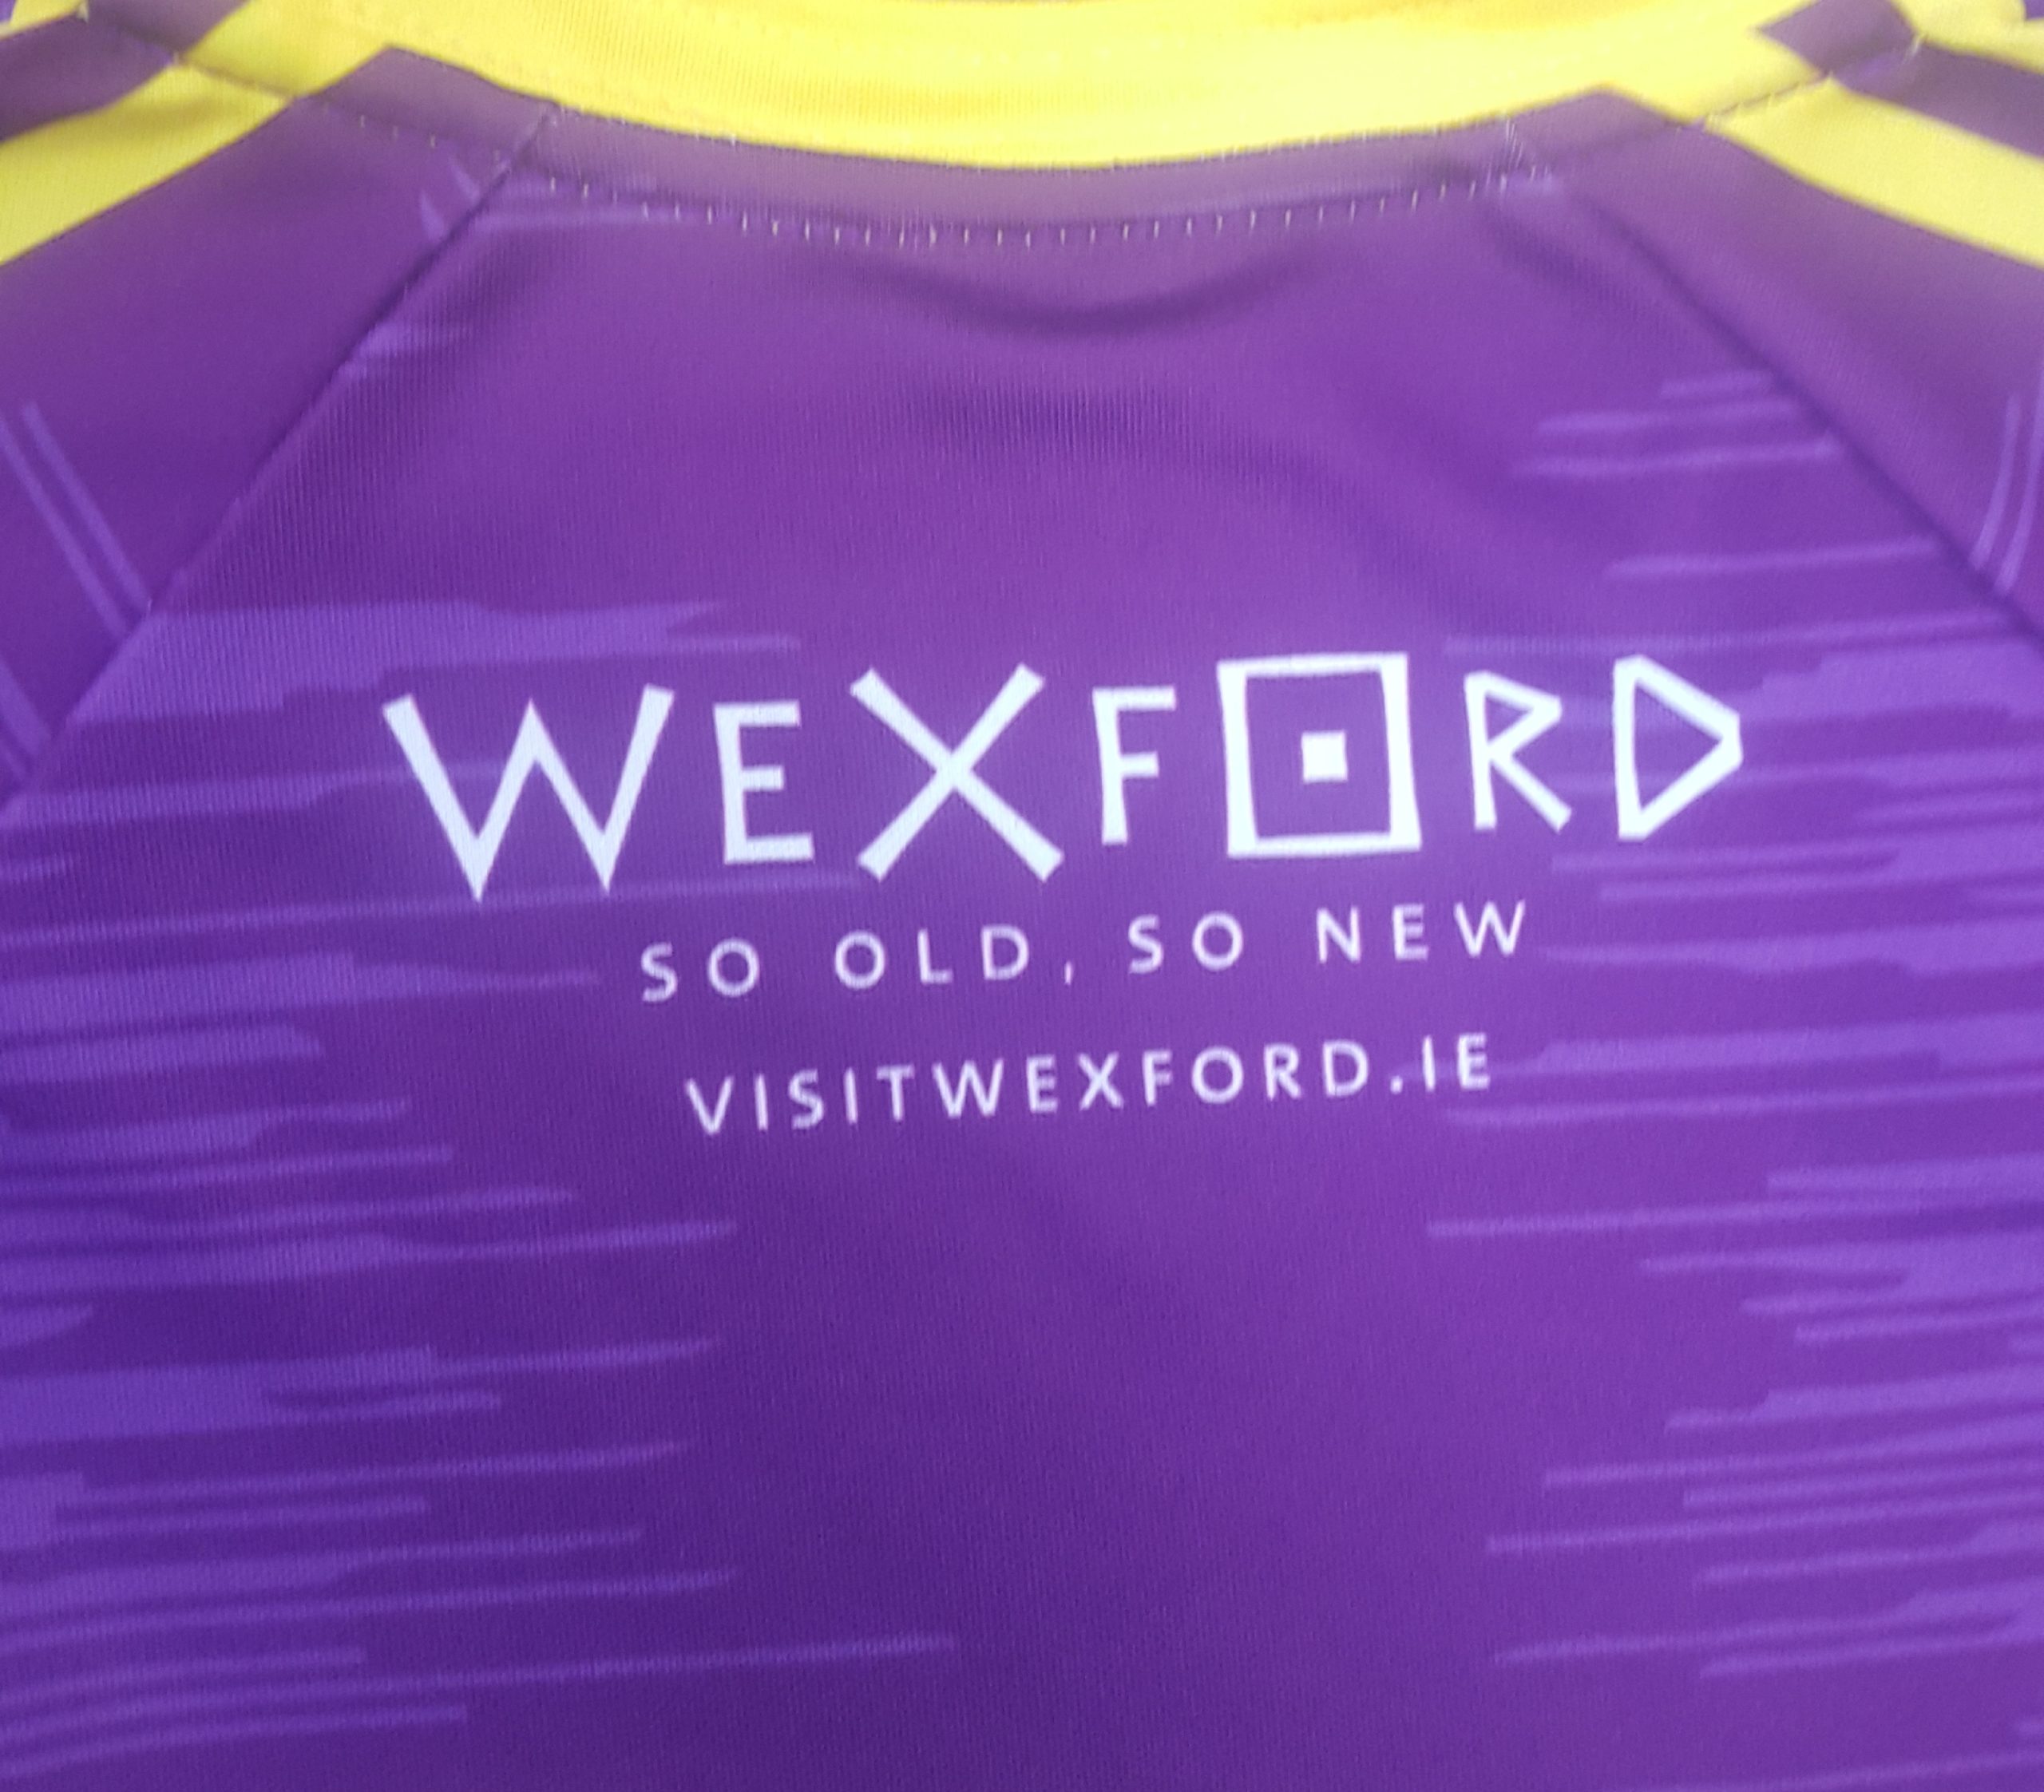 Wexford Hurlers tell New York to “Visit Wexford!”